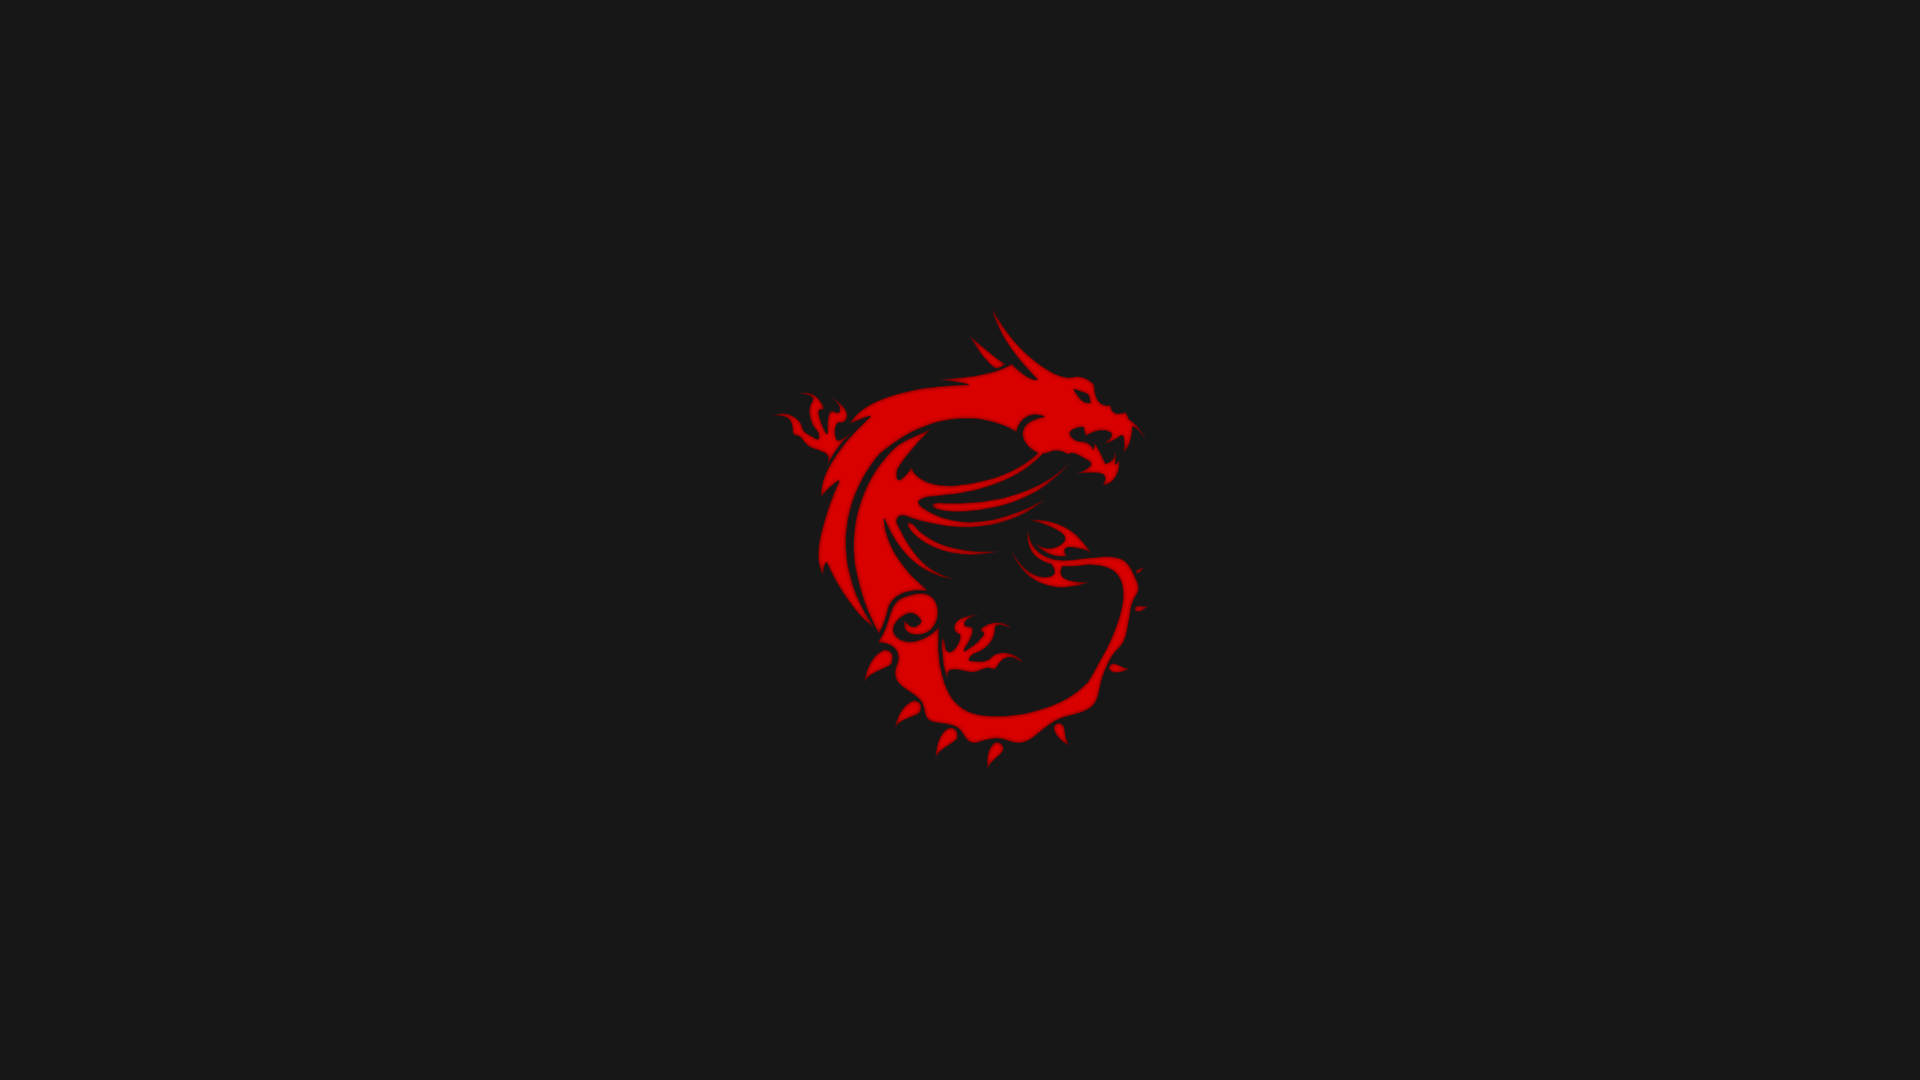 MSI's iconic Red Dragon on a sleek black background Wallpaper